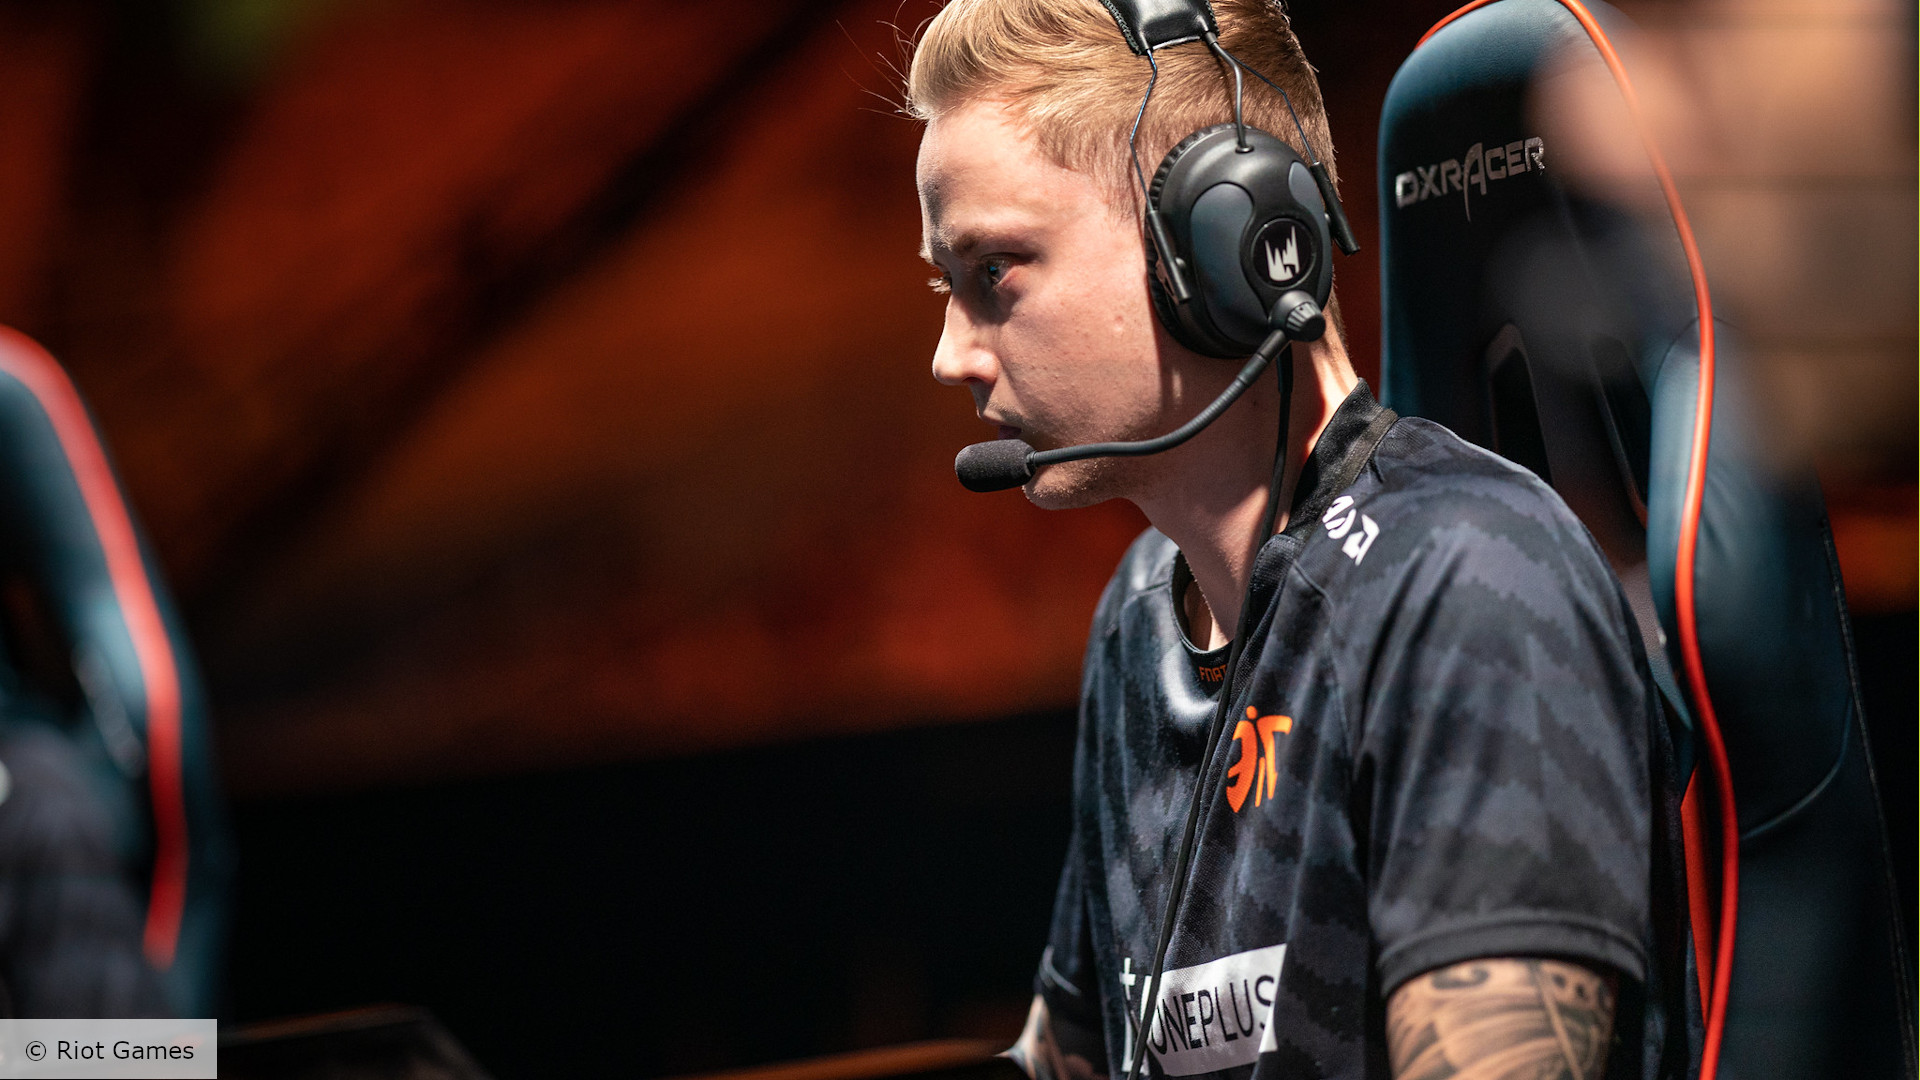 Rekkles says he'd prefer reworks over new ADC champions in League of Legends | The Loadout